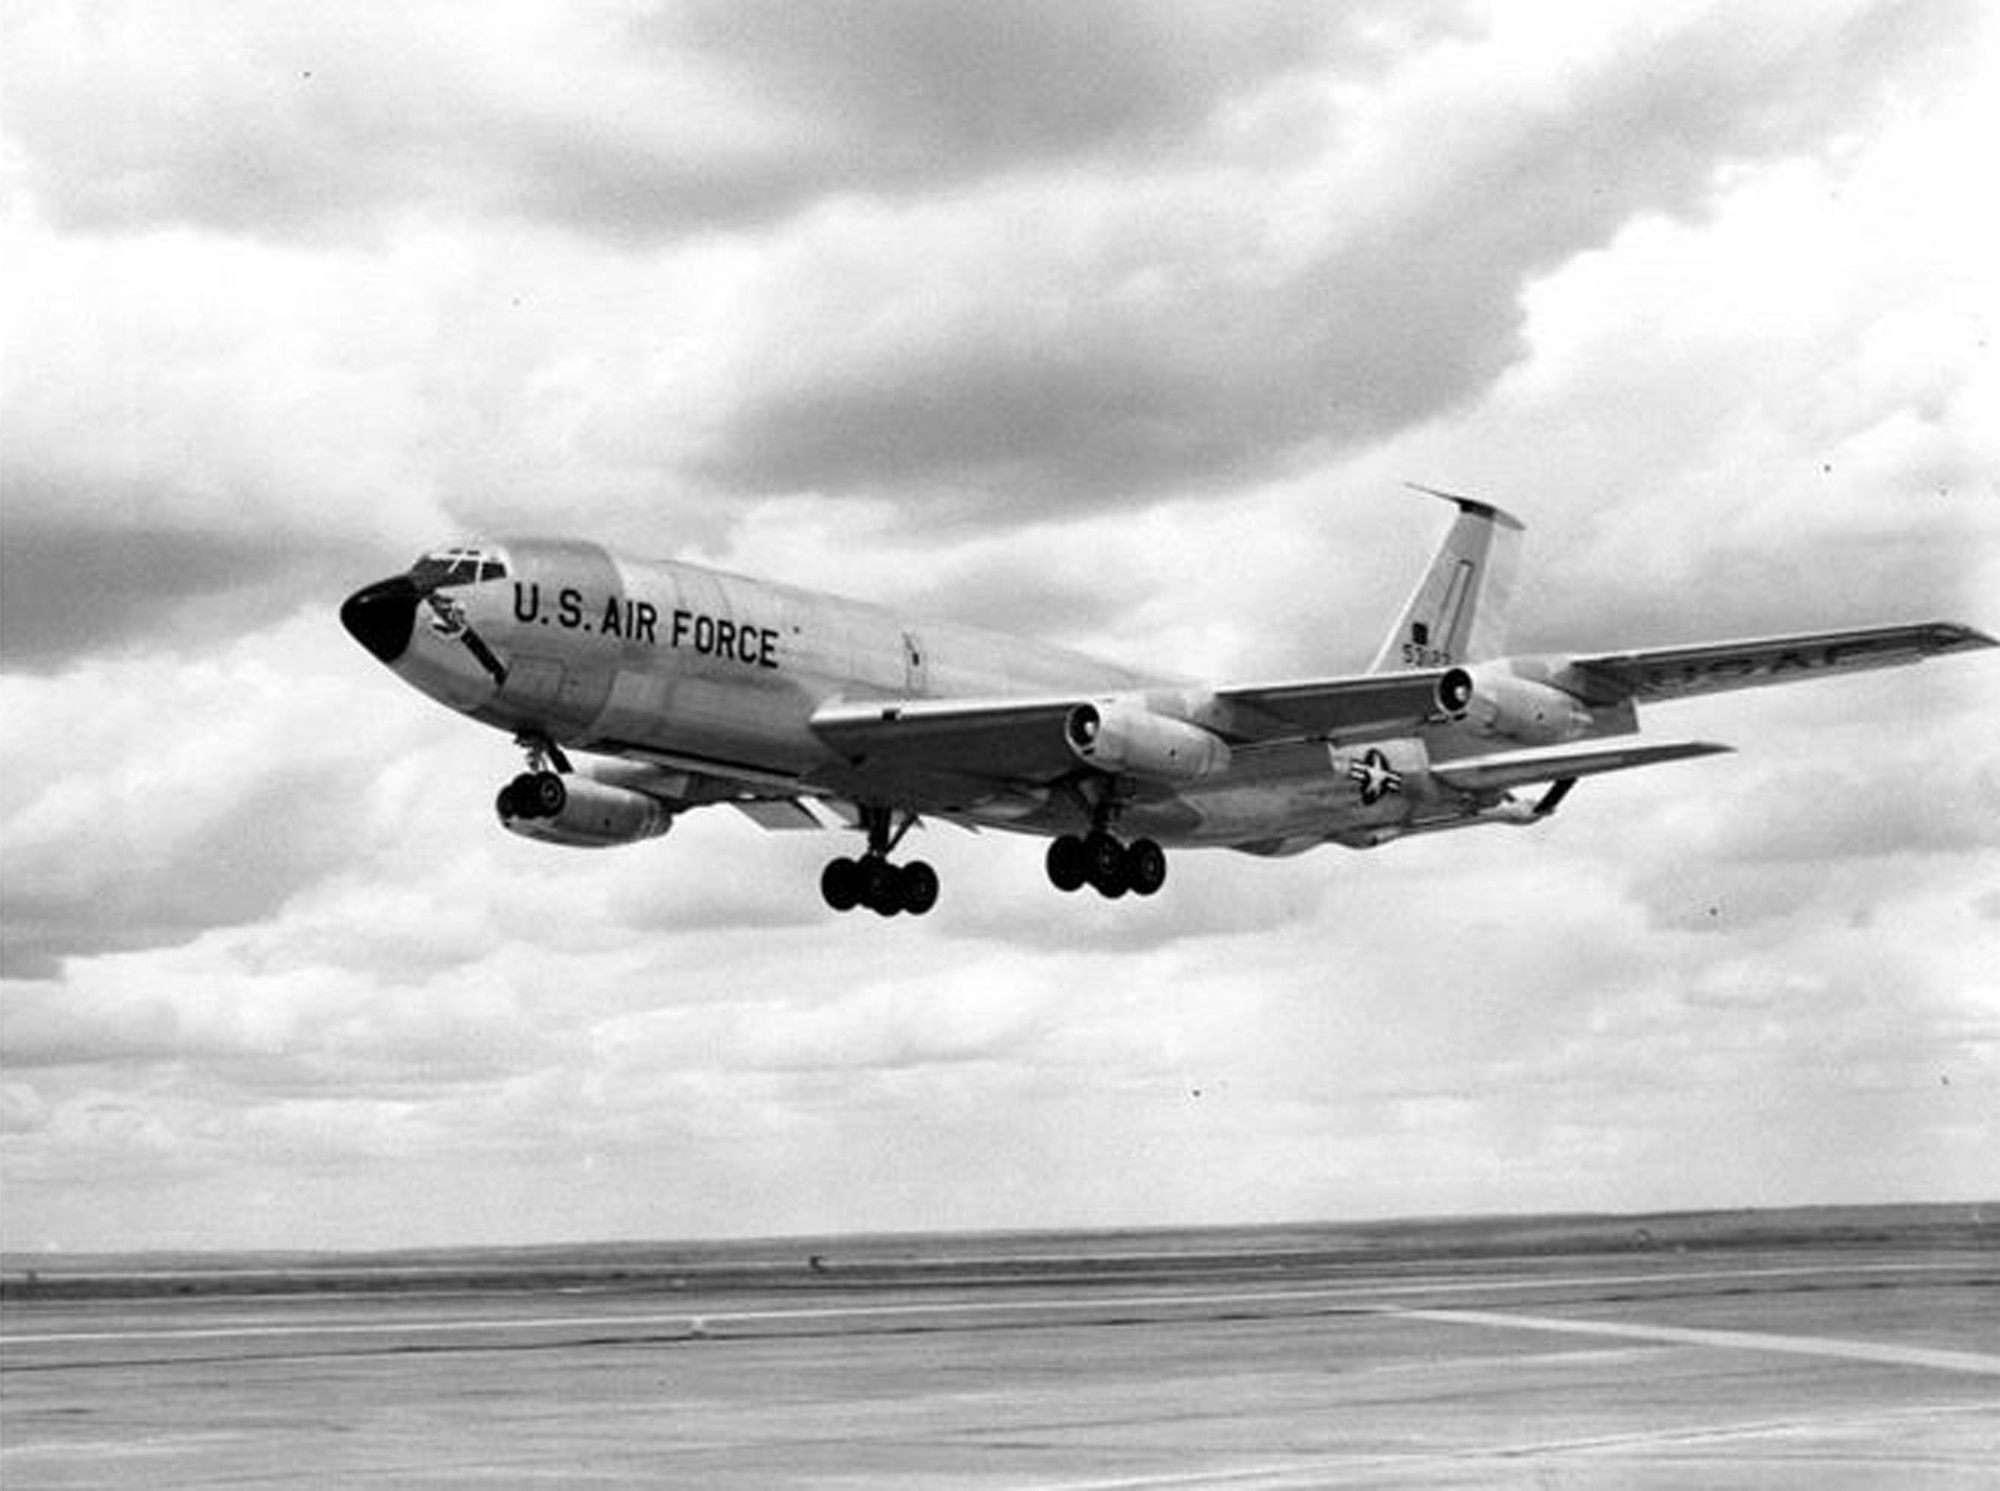 A brand new KC-135 Stratotanker, Tail number 55-3127, takes off from Larson Air Force Base, Washington, June 28, 1957, on its way to Castle AFB, Washington. This was the first KC-135 delivered to the legacy Strategic Air Command. It underwent company tests and Air Force acceptance flights at Larson AFB prior to its assignment with the 93rd Air Refueling Squadron. (U.S. Air Force Courtesy Photo)